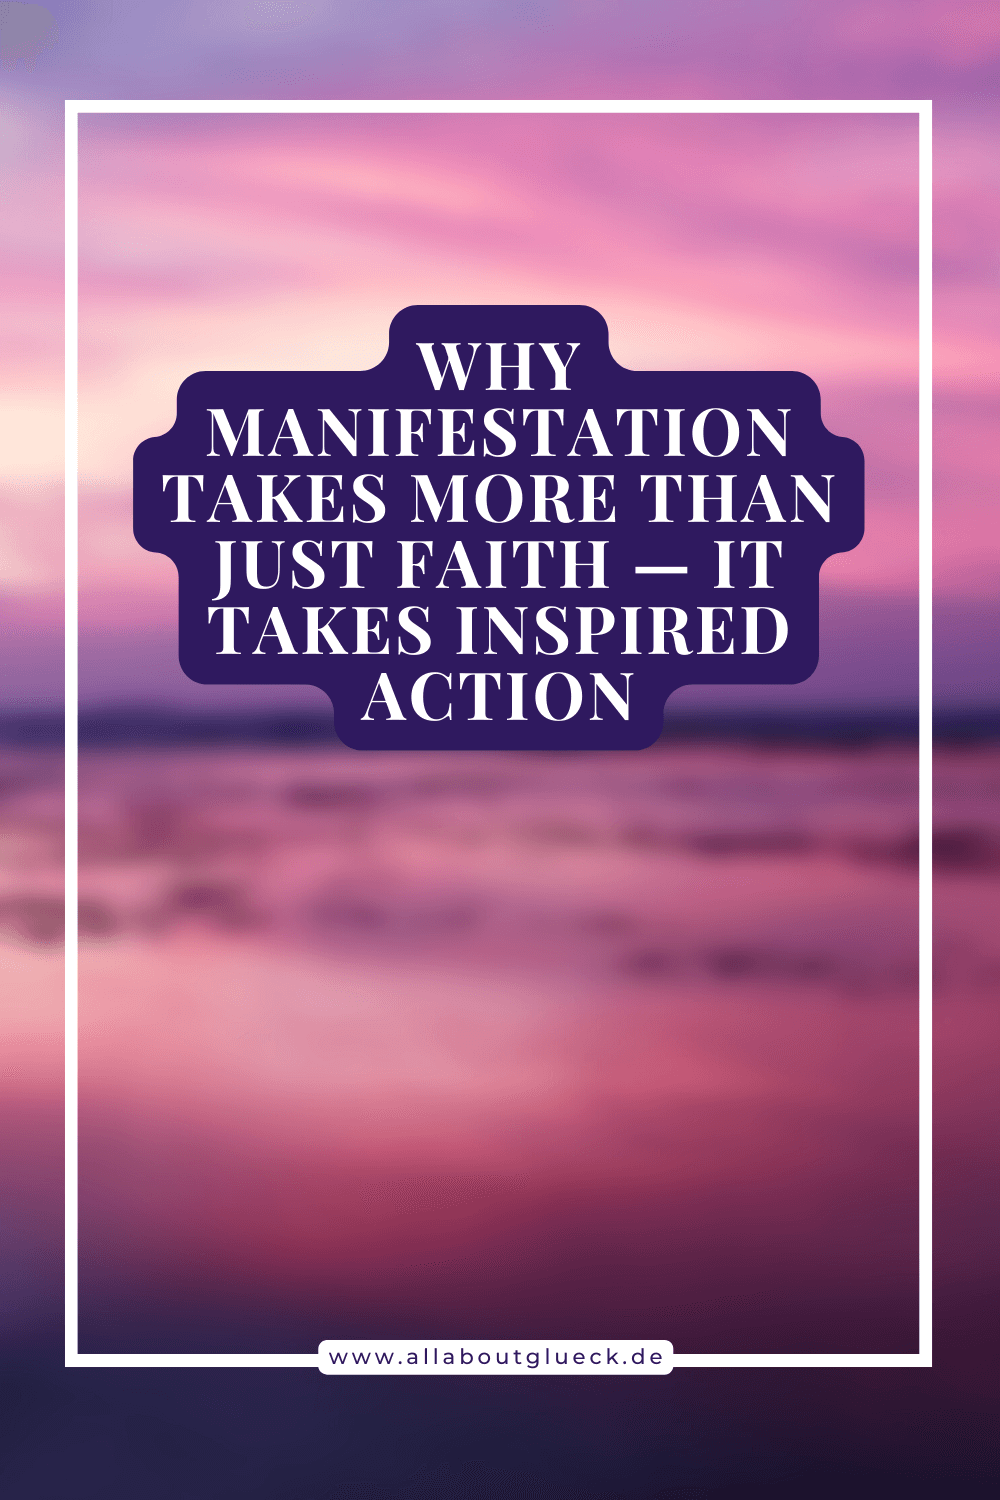 Manifesting Step by Step: Why You Need More Than Just Belief—The Guide to Inspired Action